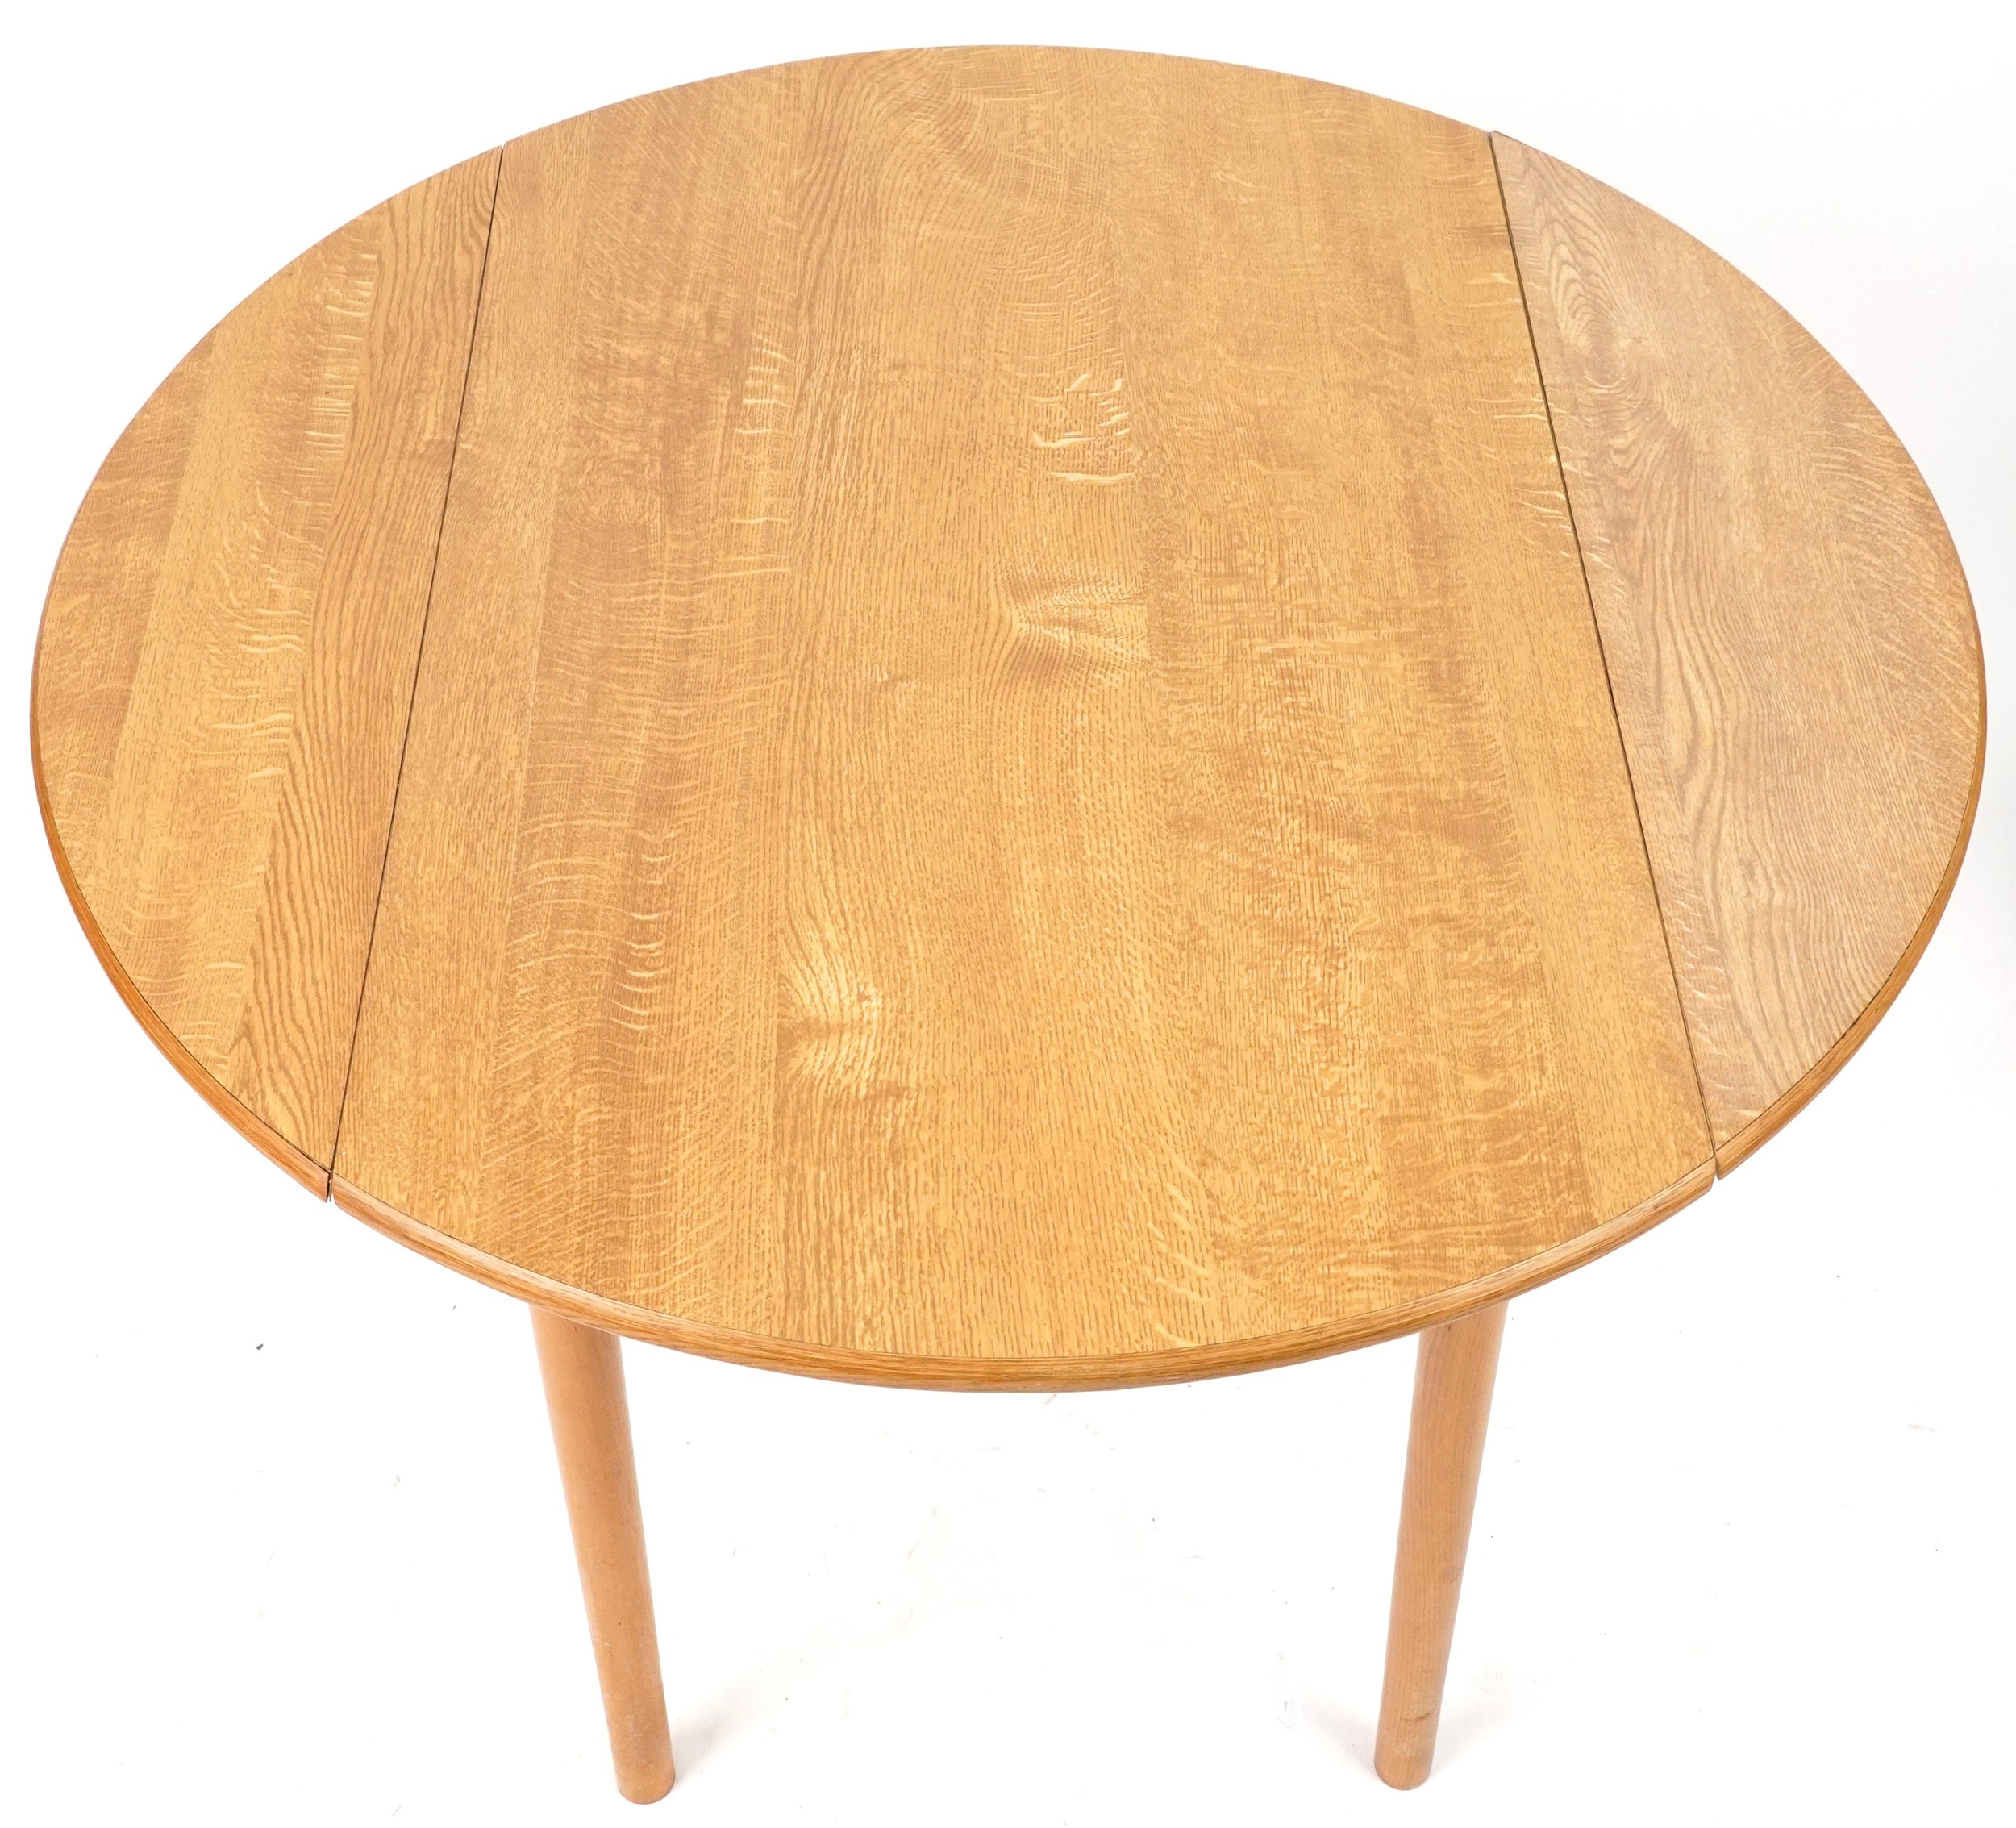 Ercol style lightwood drop end dining table with two stick back chairs, the table 74cm H x 55cm W - Image 3 of 9